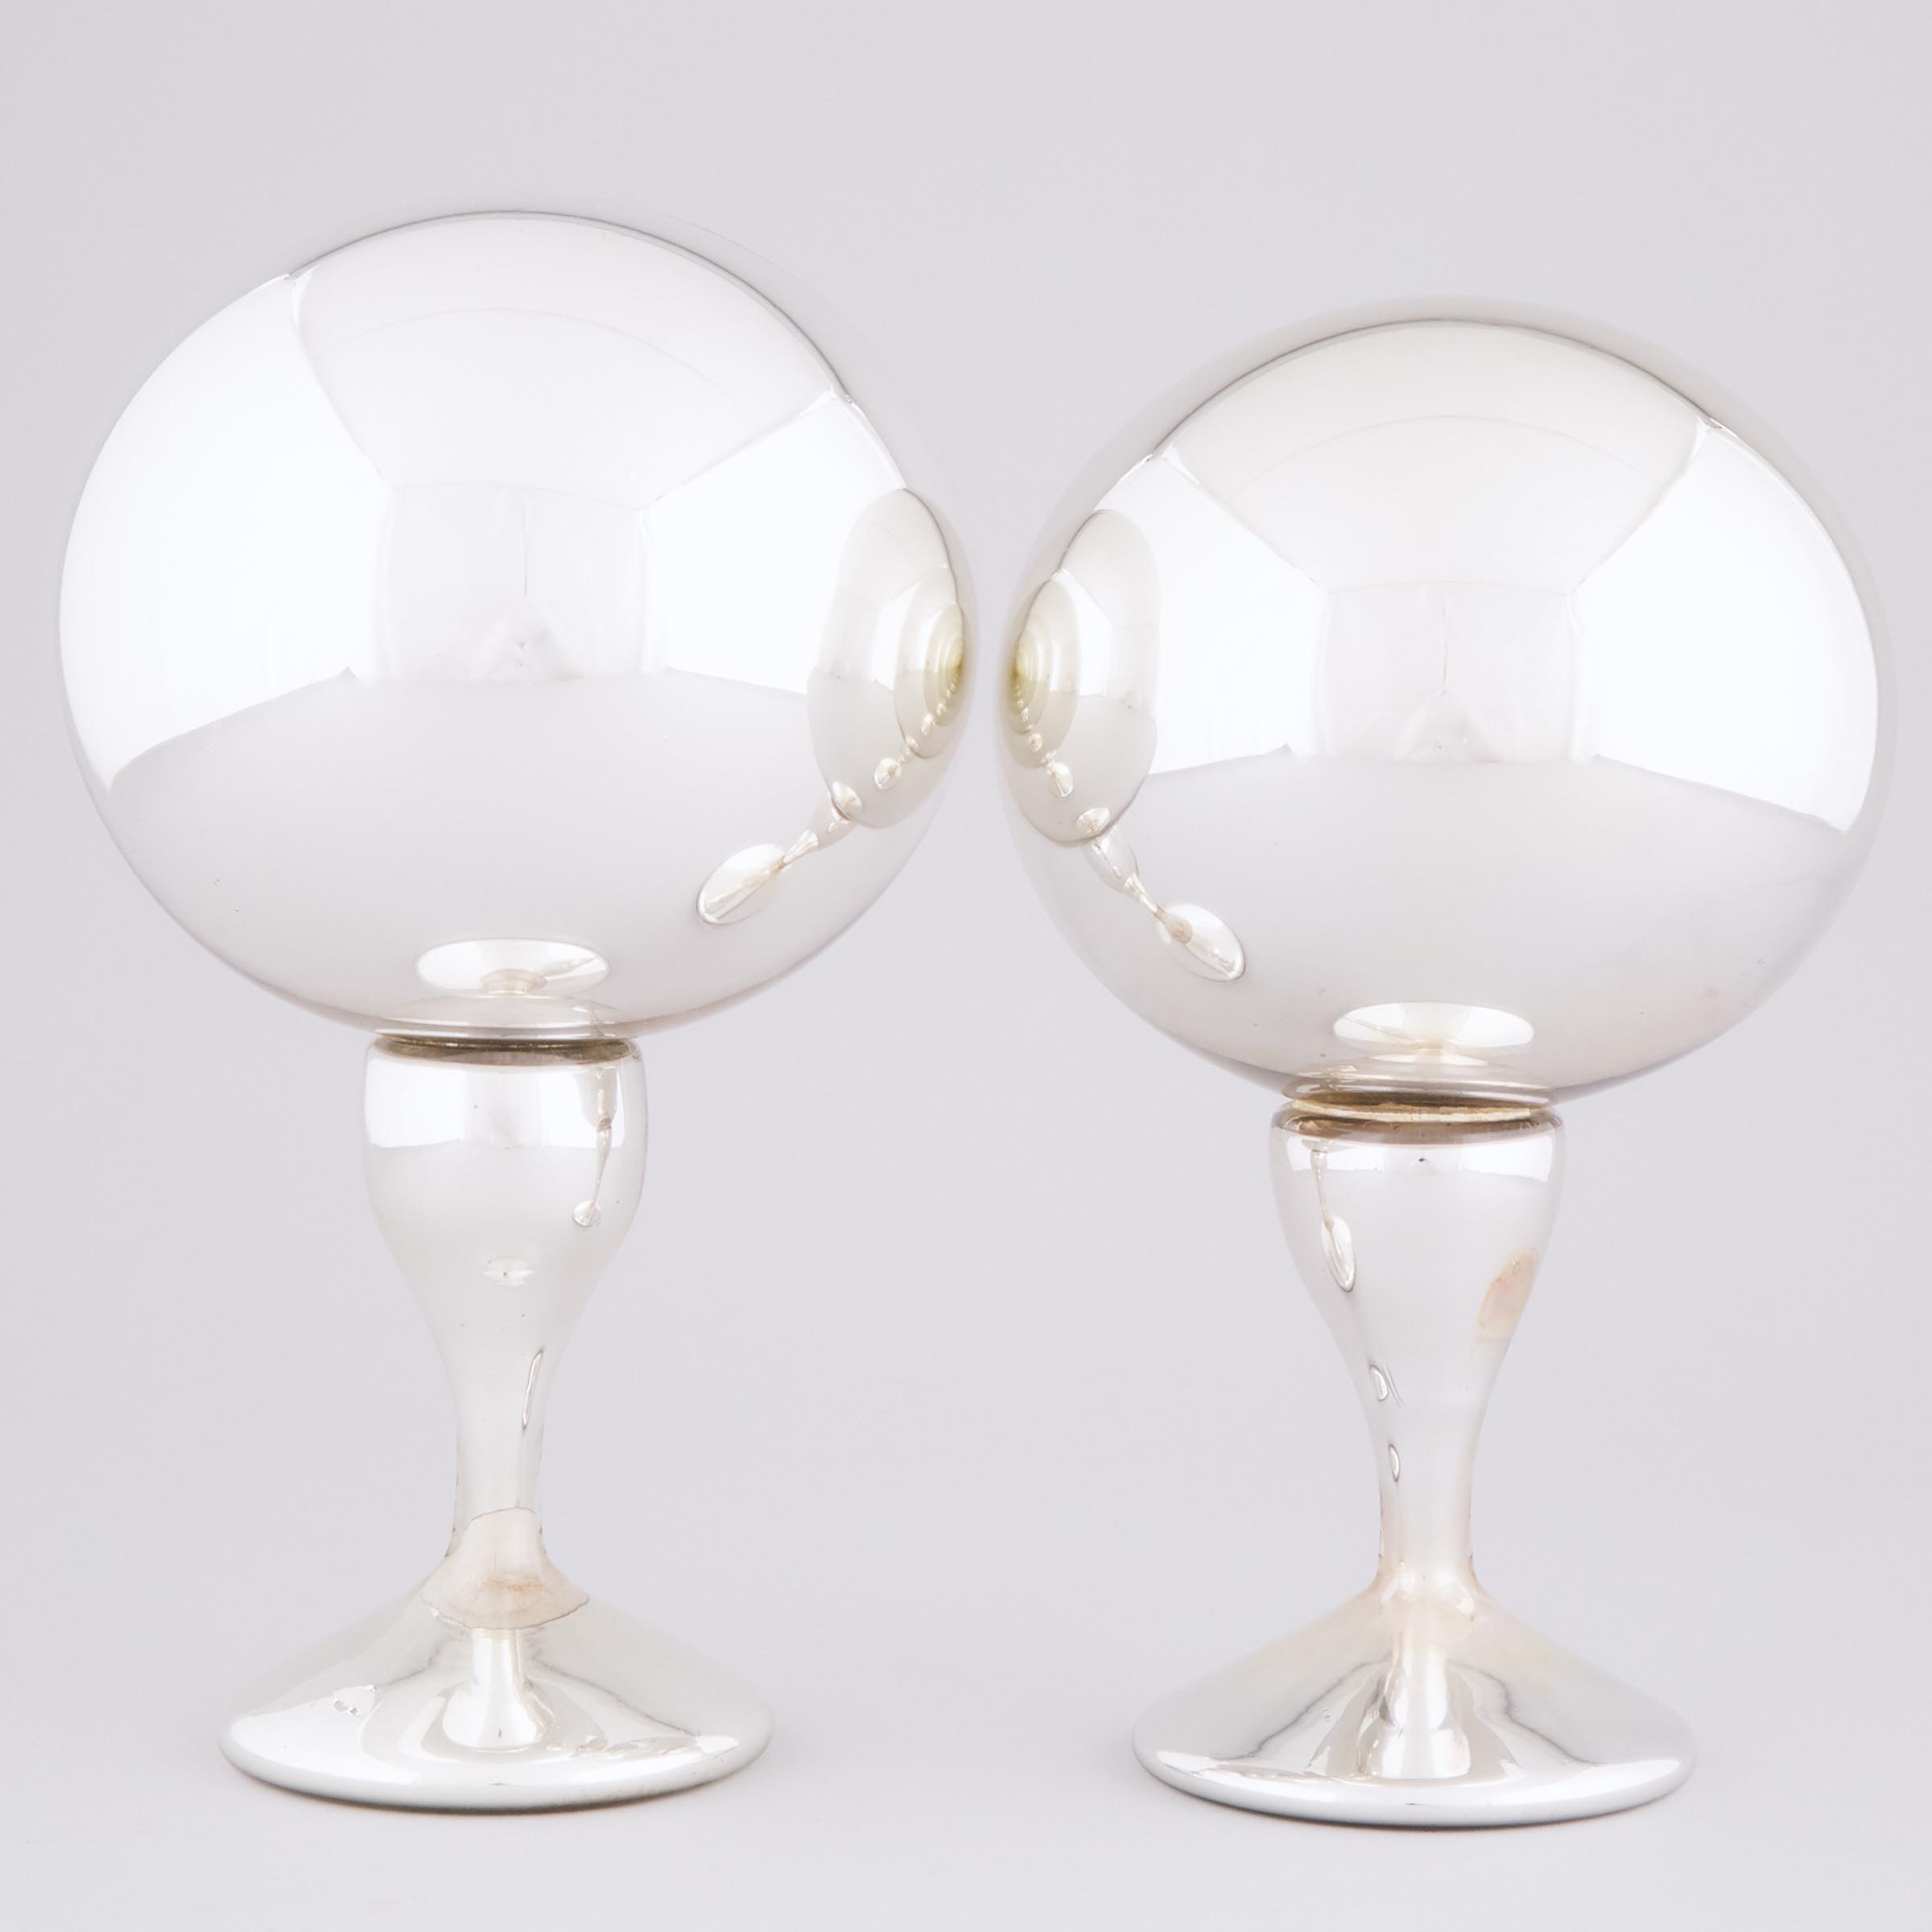 Two Mercury Glass Pedestal-Footed Witches' Balls, 19th century